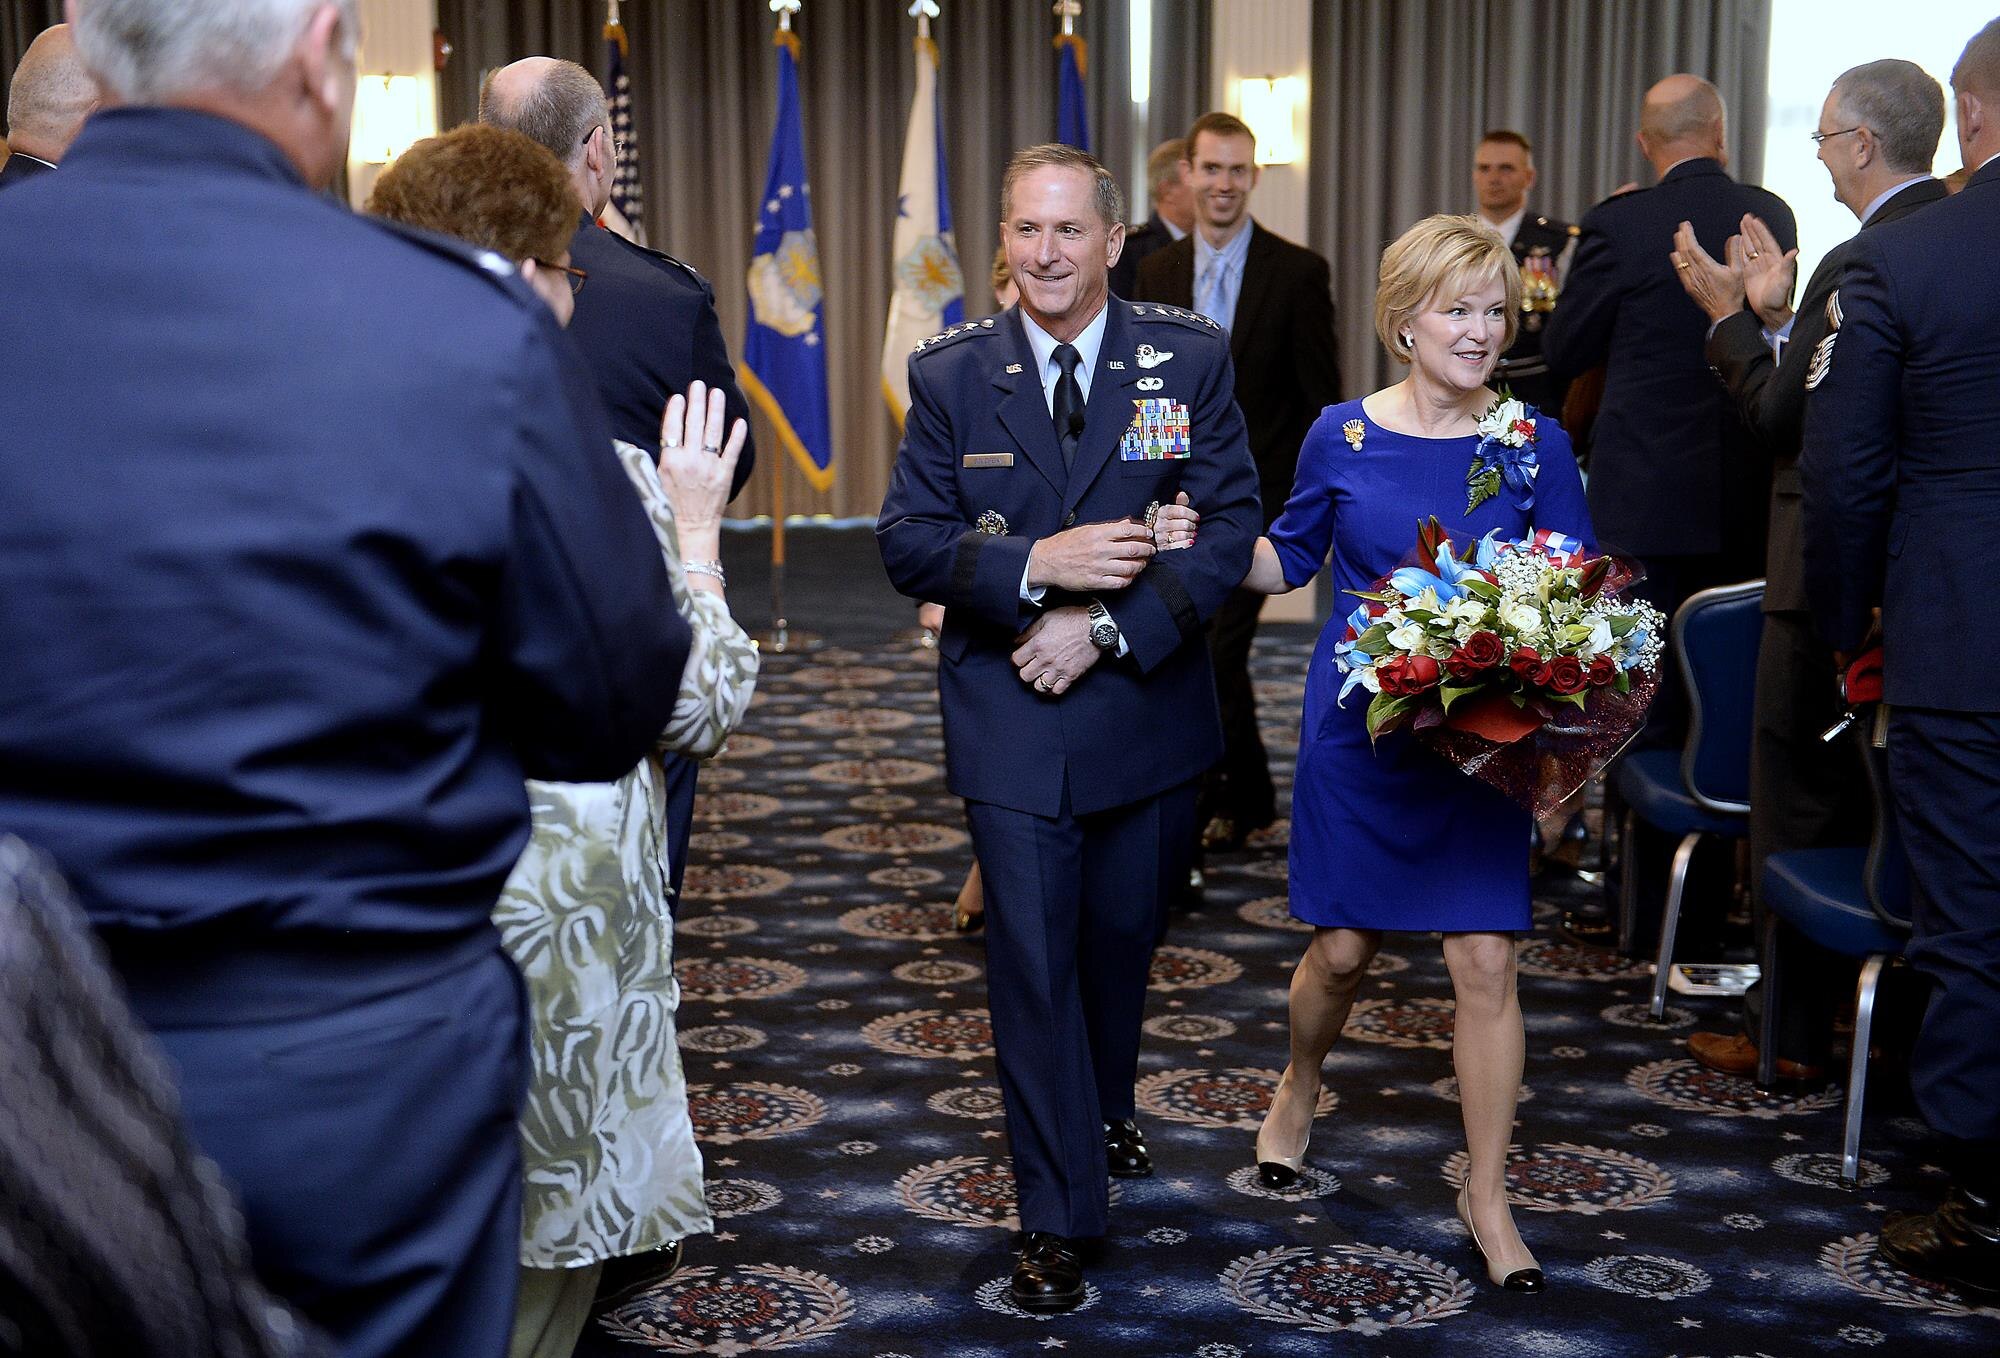 Gen. David L. Goldfein and his wife, Dawn, depart the revue where he was promoted during a ceremony Aug. 6, 2015, in Washington, D.C. Goldfein will become the Air Force's 38th vice chief of staff and most recently served as the director of the Joint Staff. (U.S. Air Force photo/Scott M. Ash)